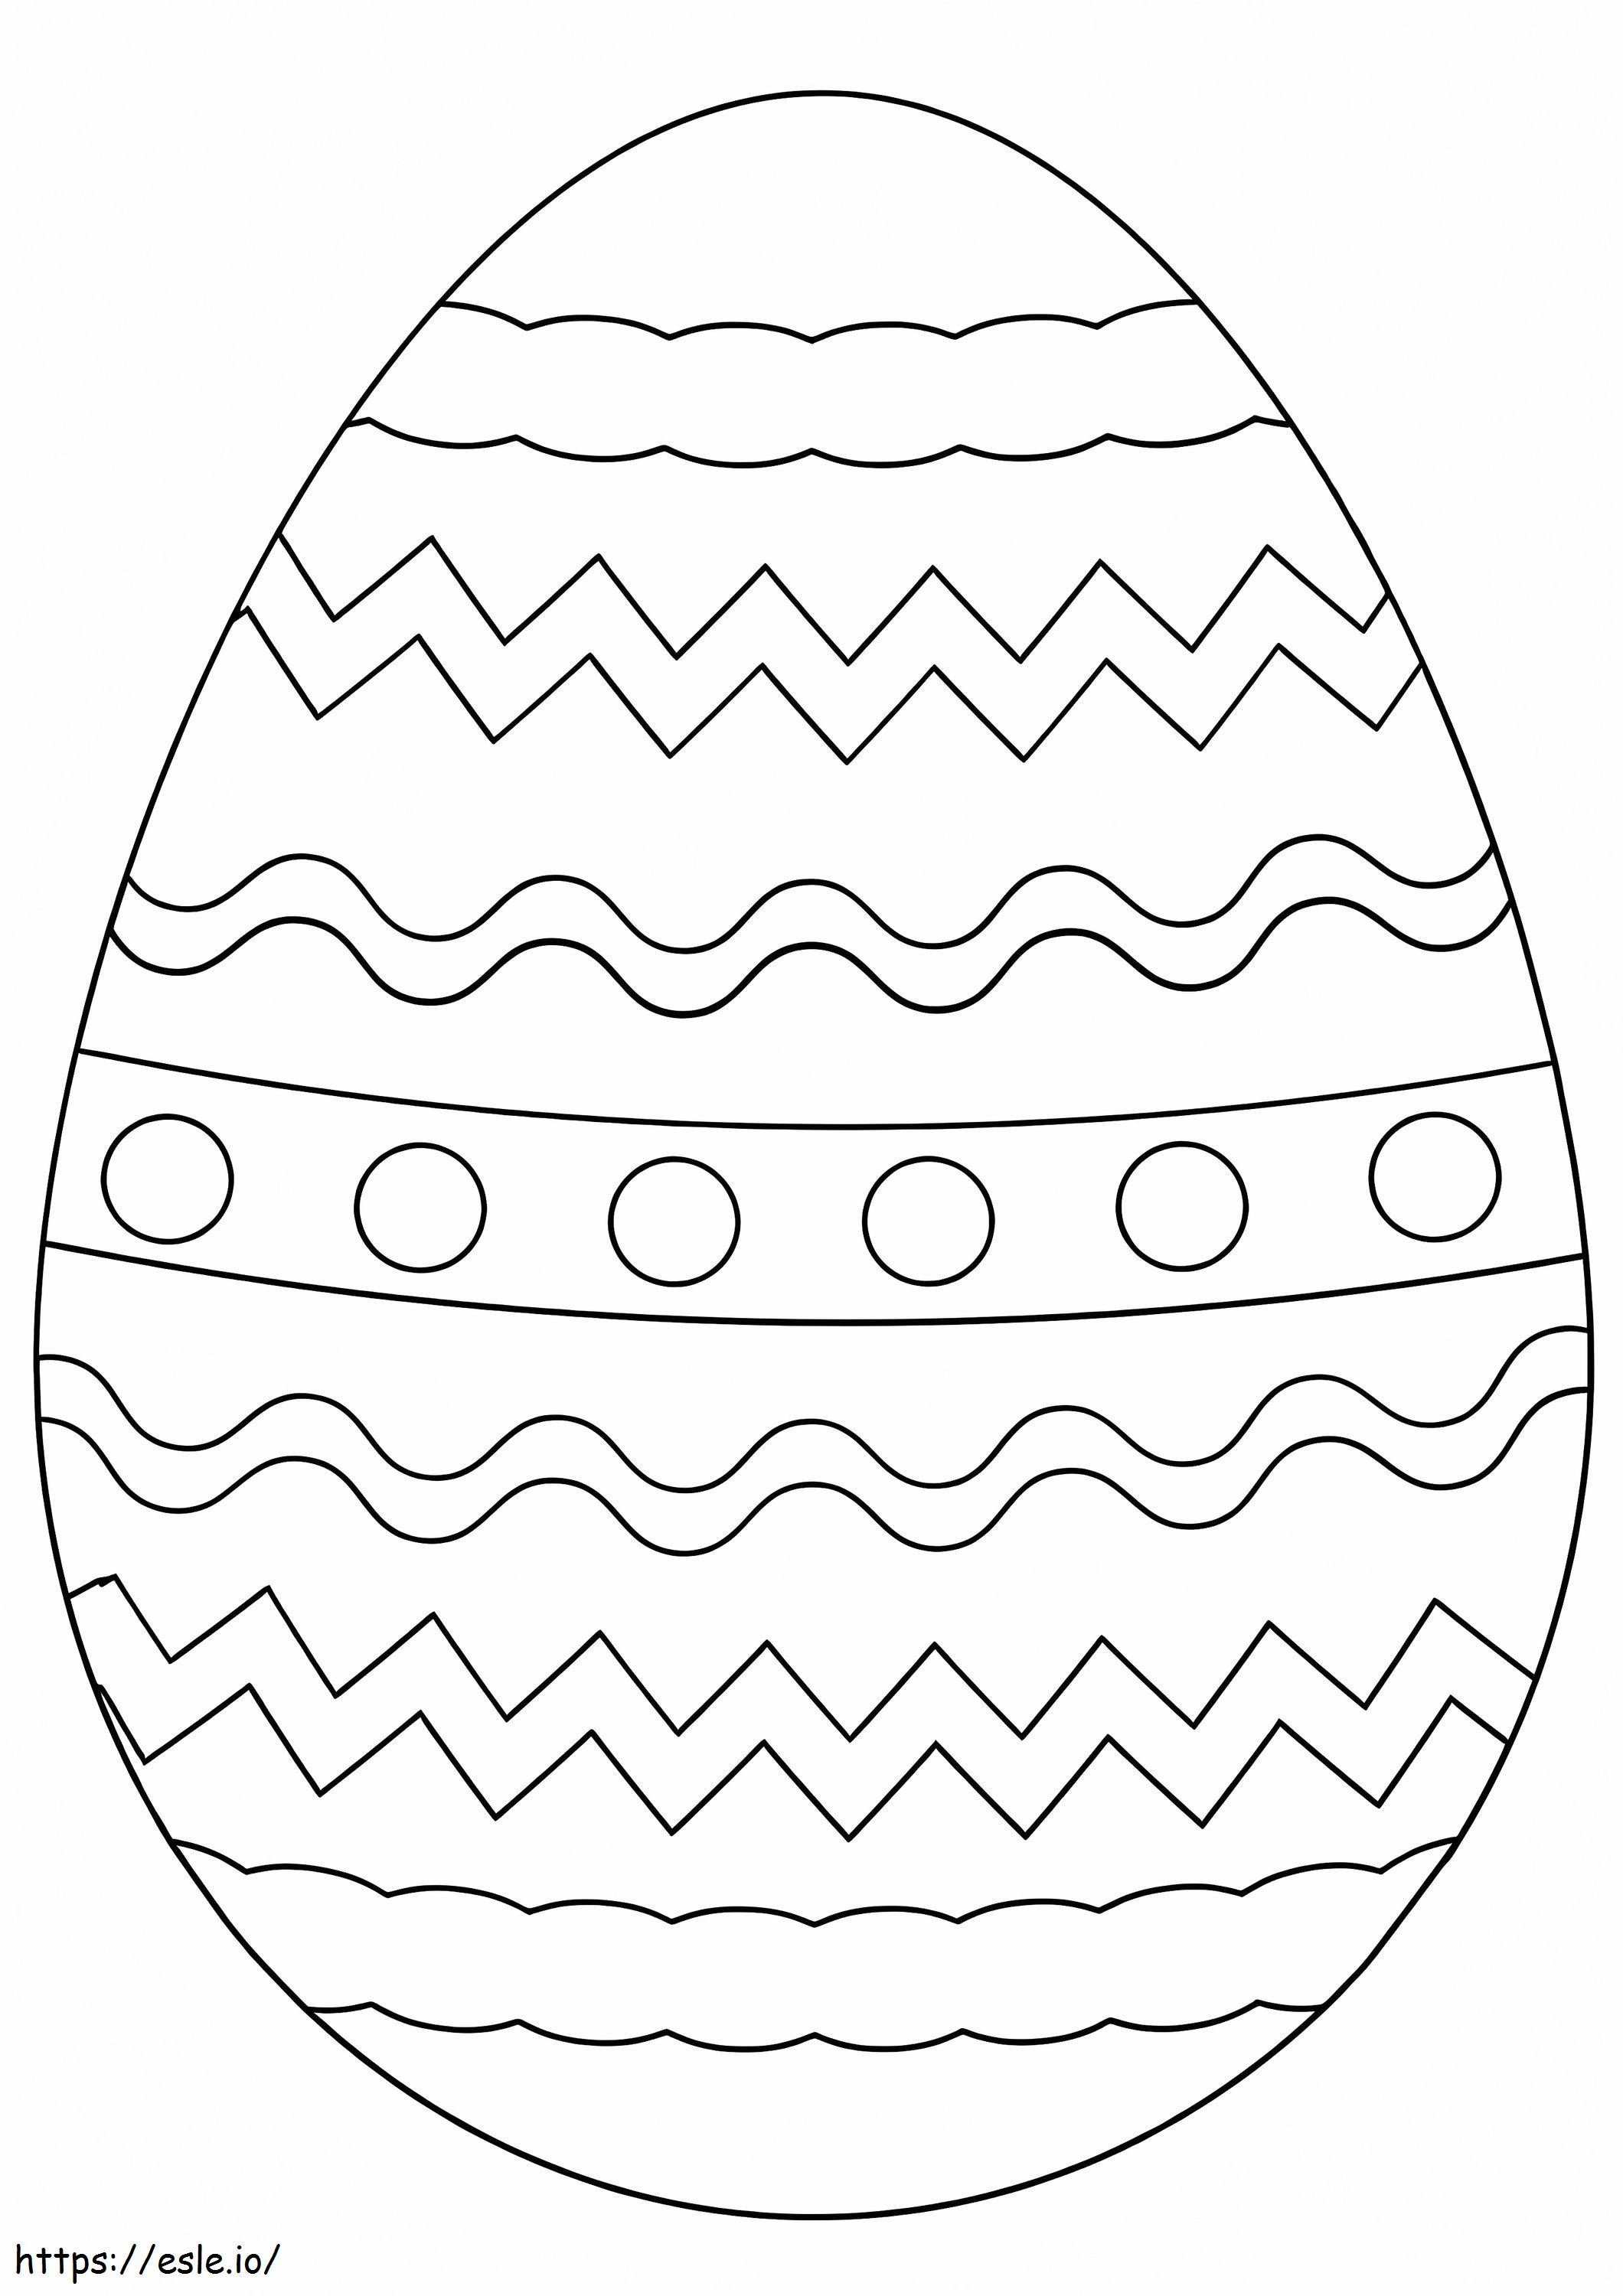 Nice Easter Egg 4 coloring page